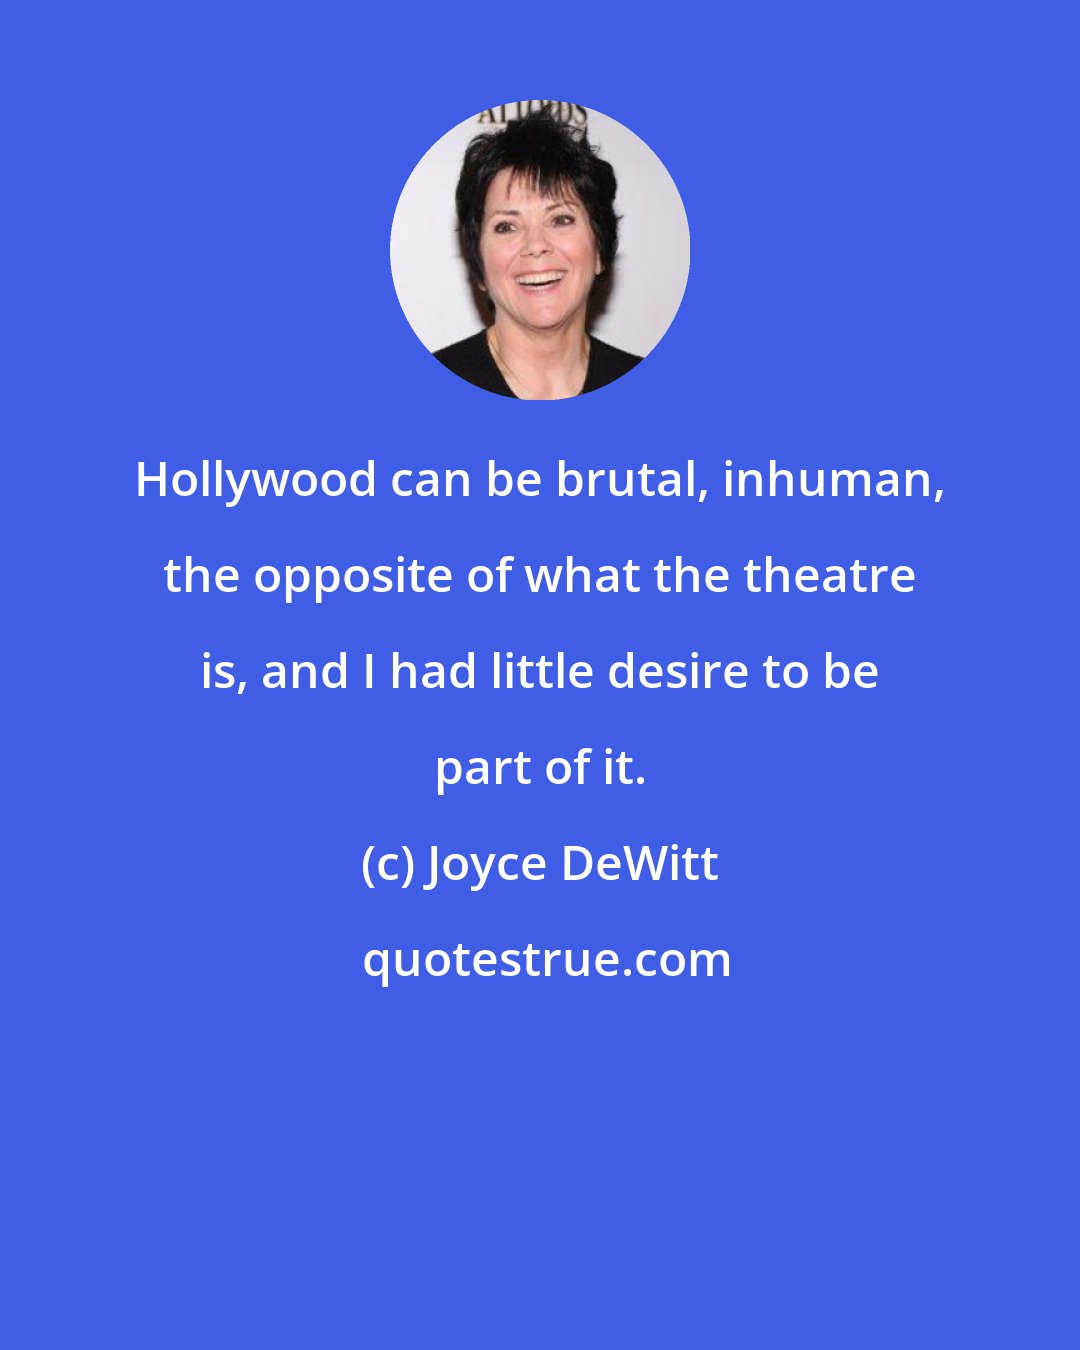 Joyce DeWitt: Hollywood can be brutal, inhuman, the opposite of what the theatre is, and I had little desire to be part of it.